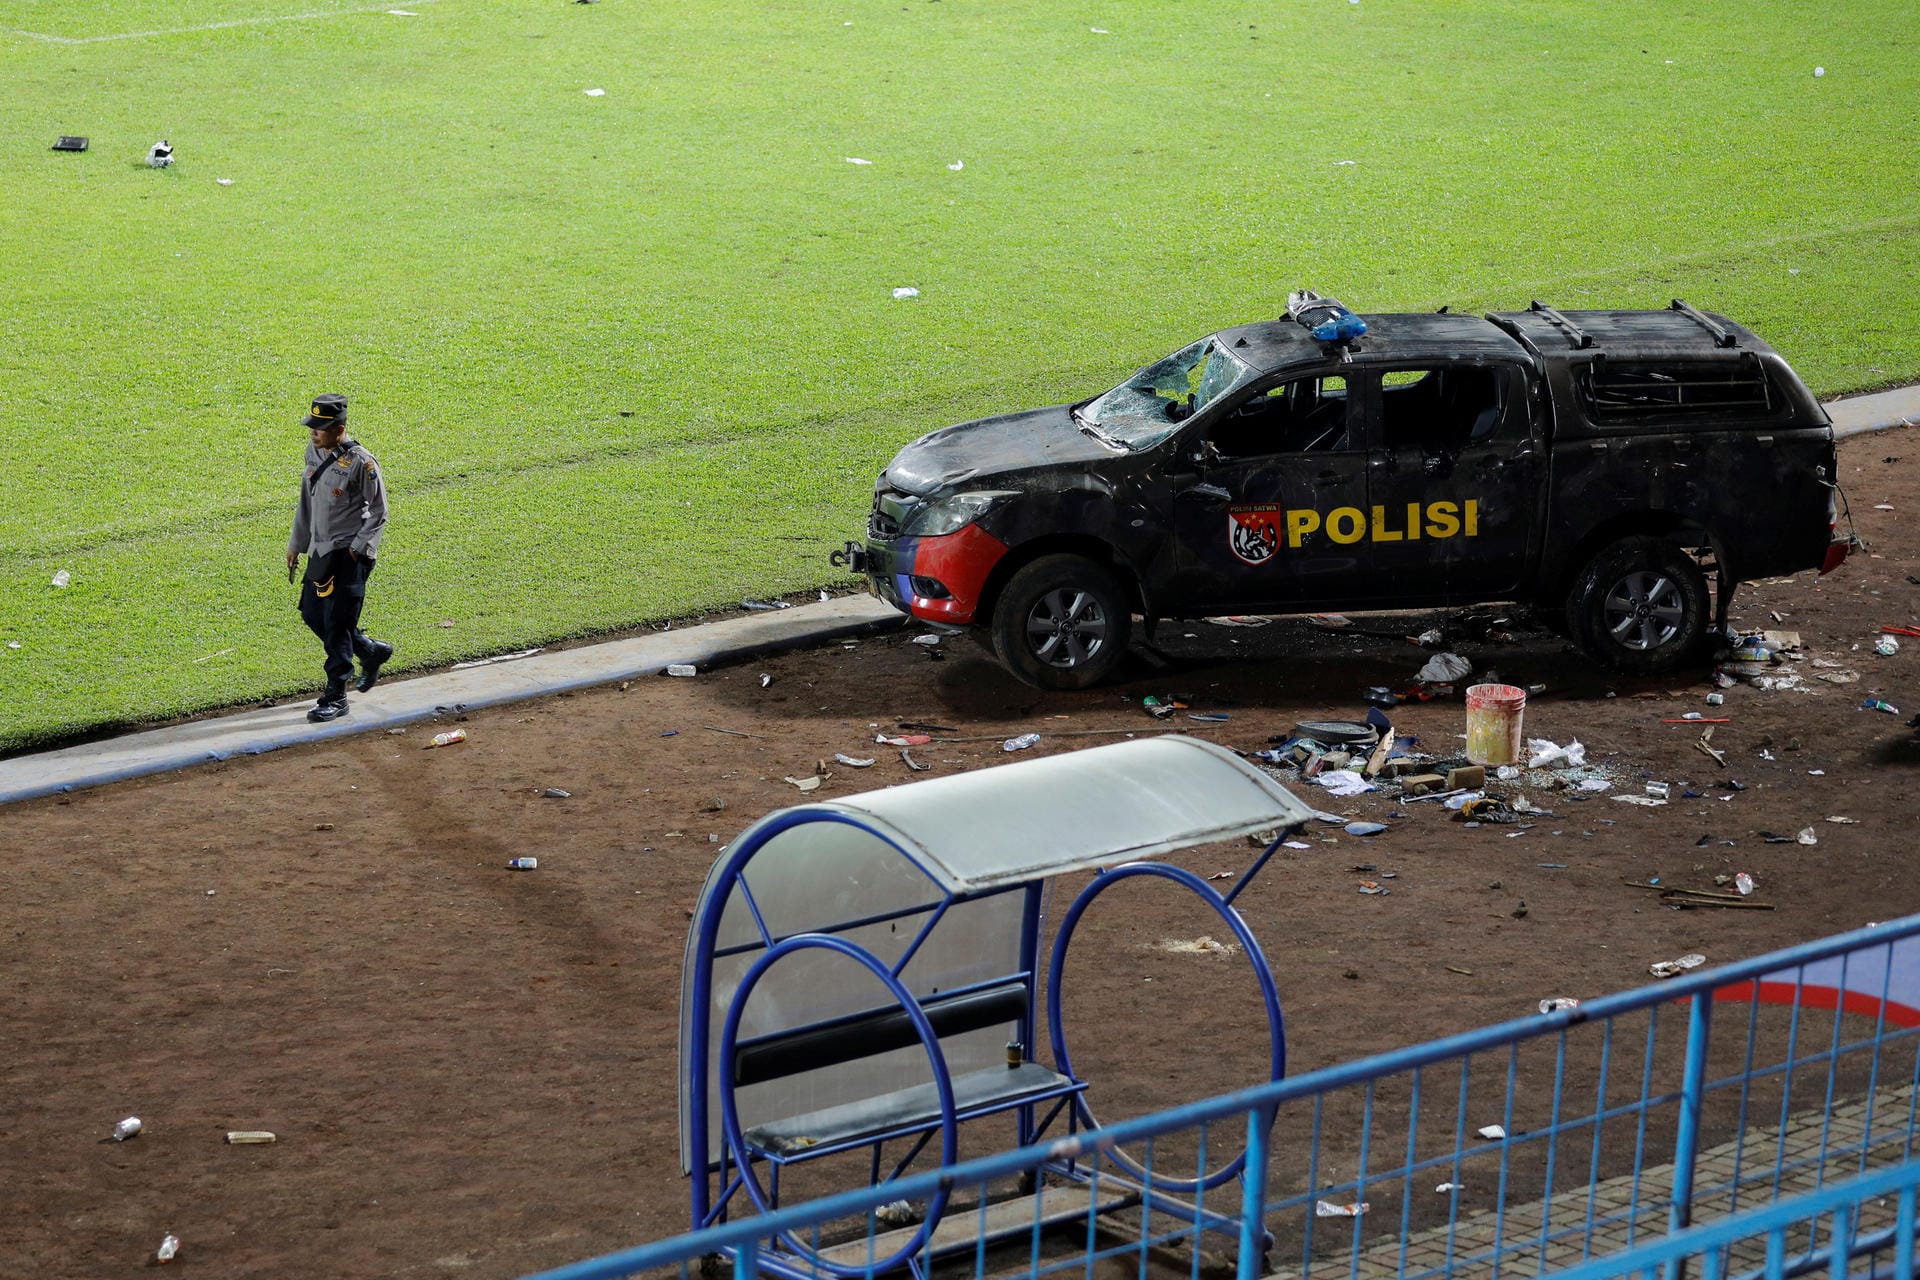 Aftermath of a fatal football stampede in Malang